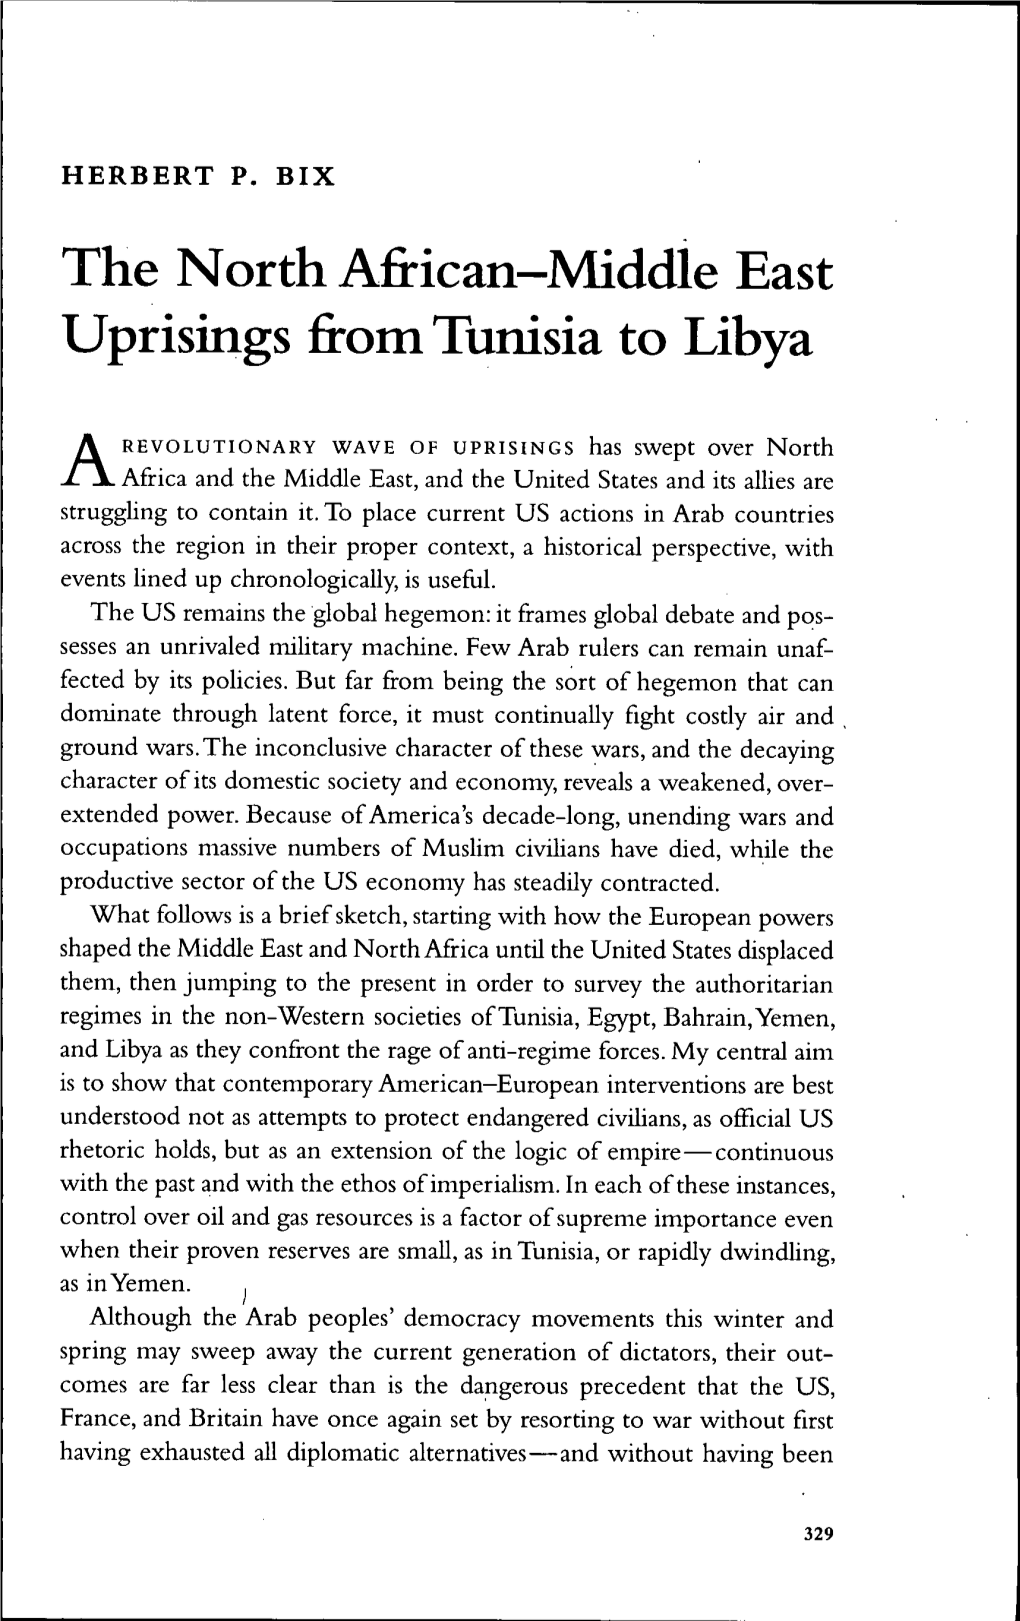 The North African-Middle East Uprisings from Tunisia to Libya